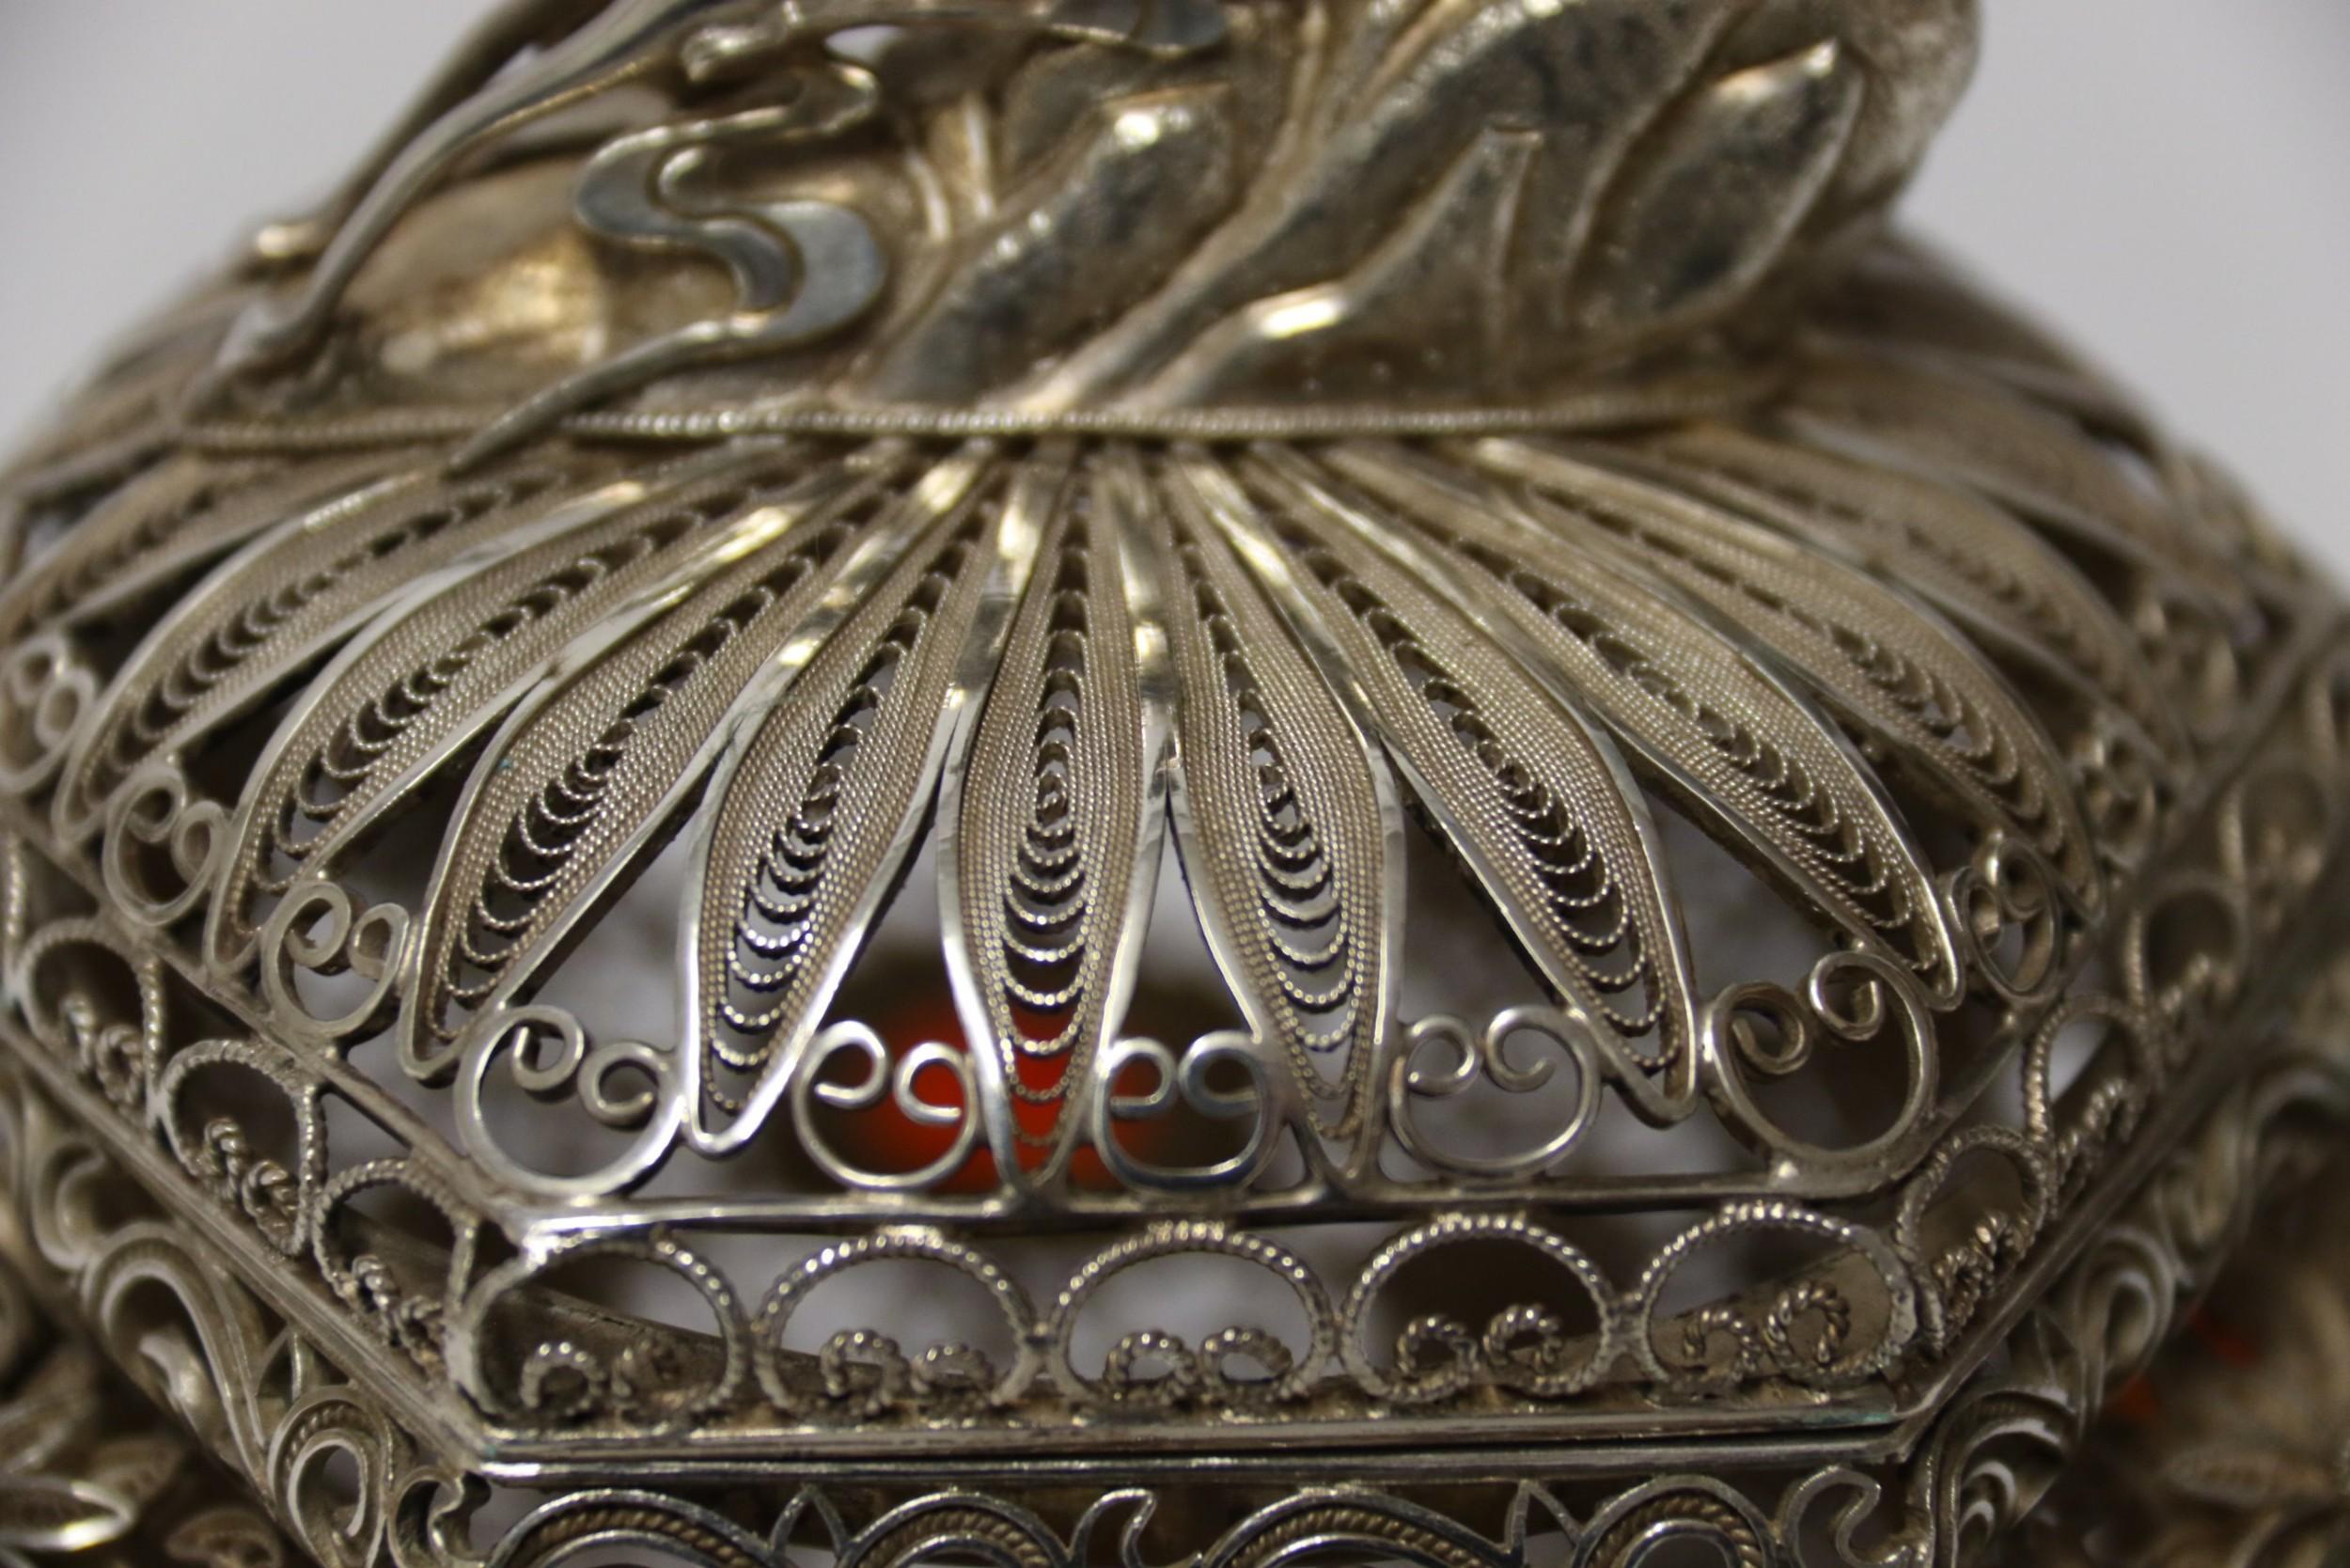 19th Century Indian Silver Filigree Work Incense Burner with Mounted Cabochons For Sale 7